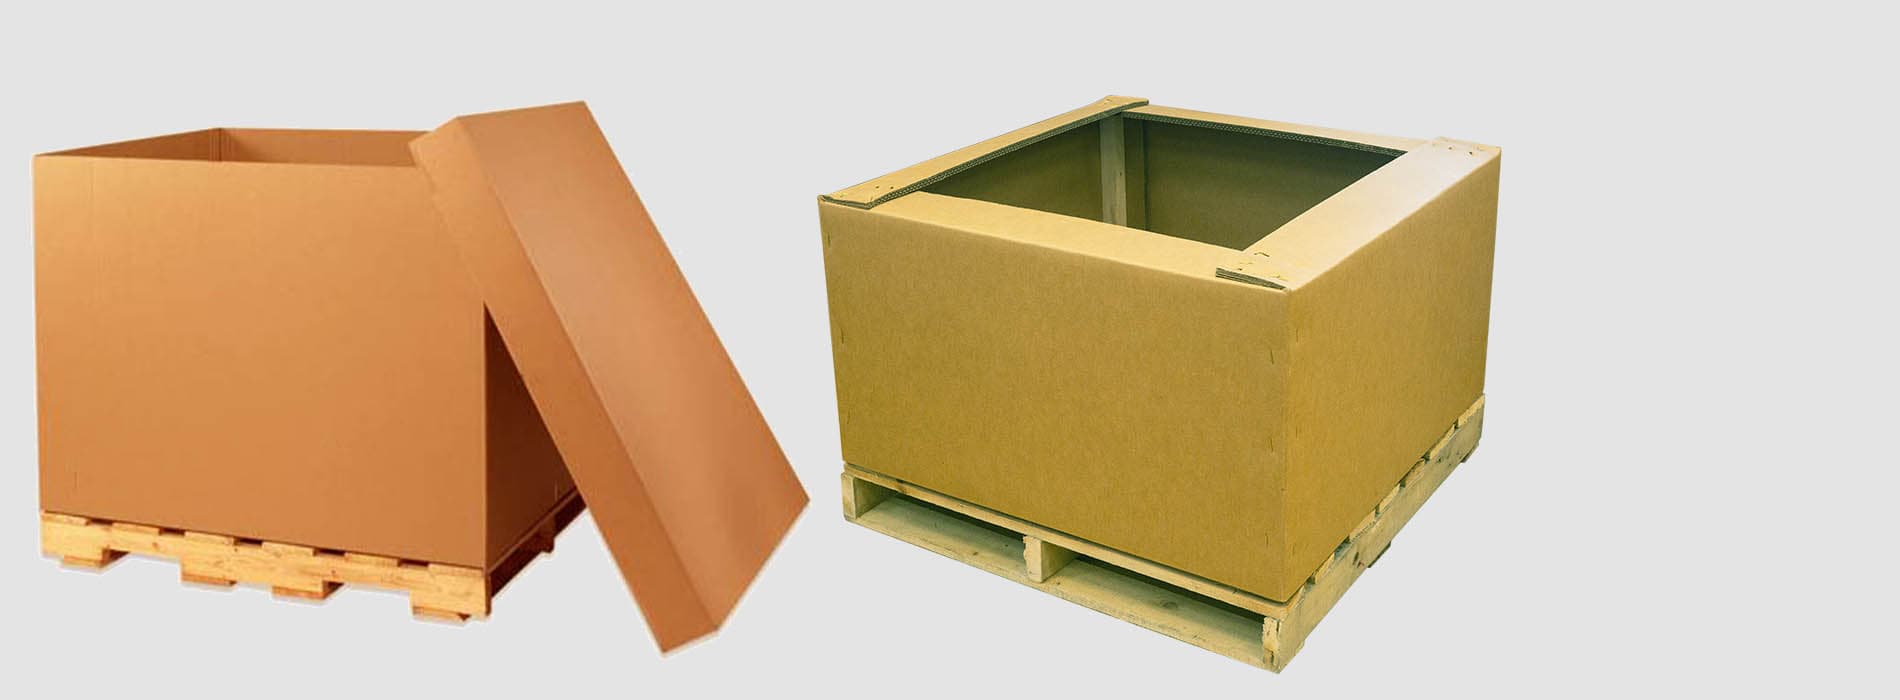 Packaging Boxes - Welch Packaging